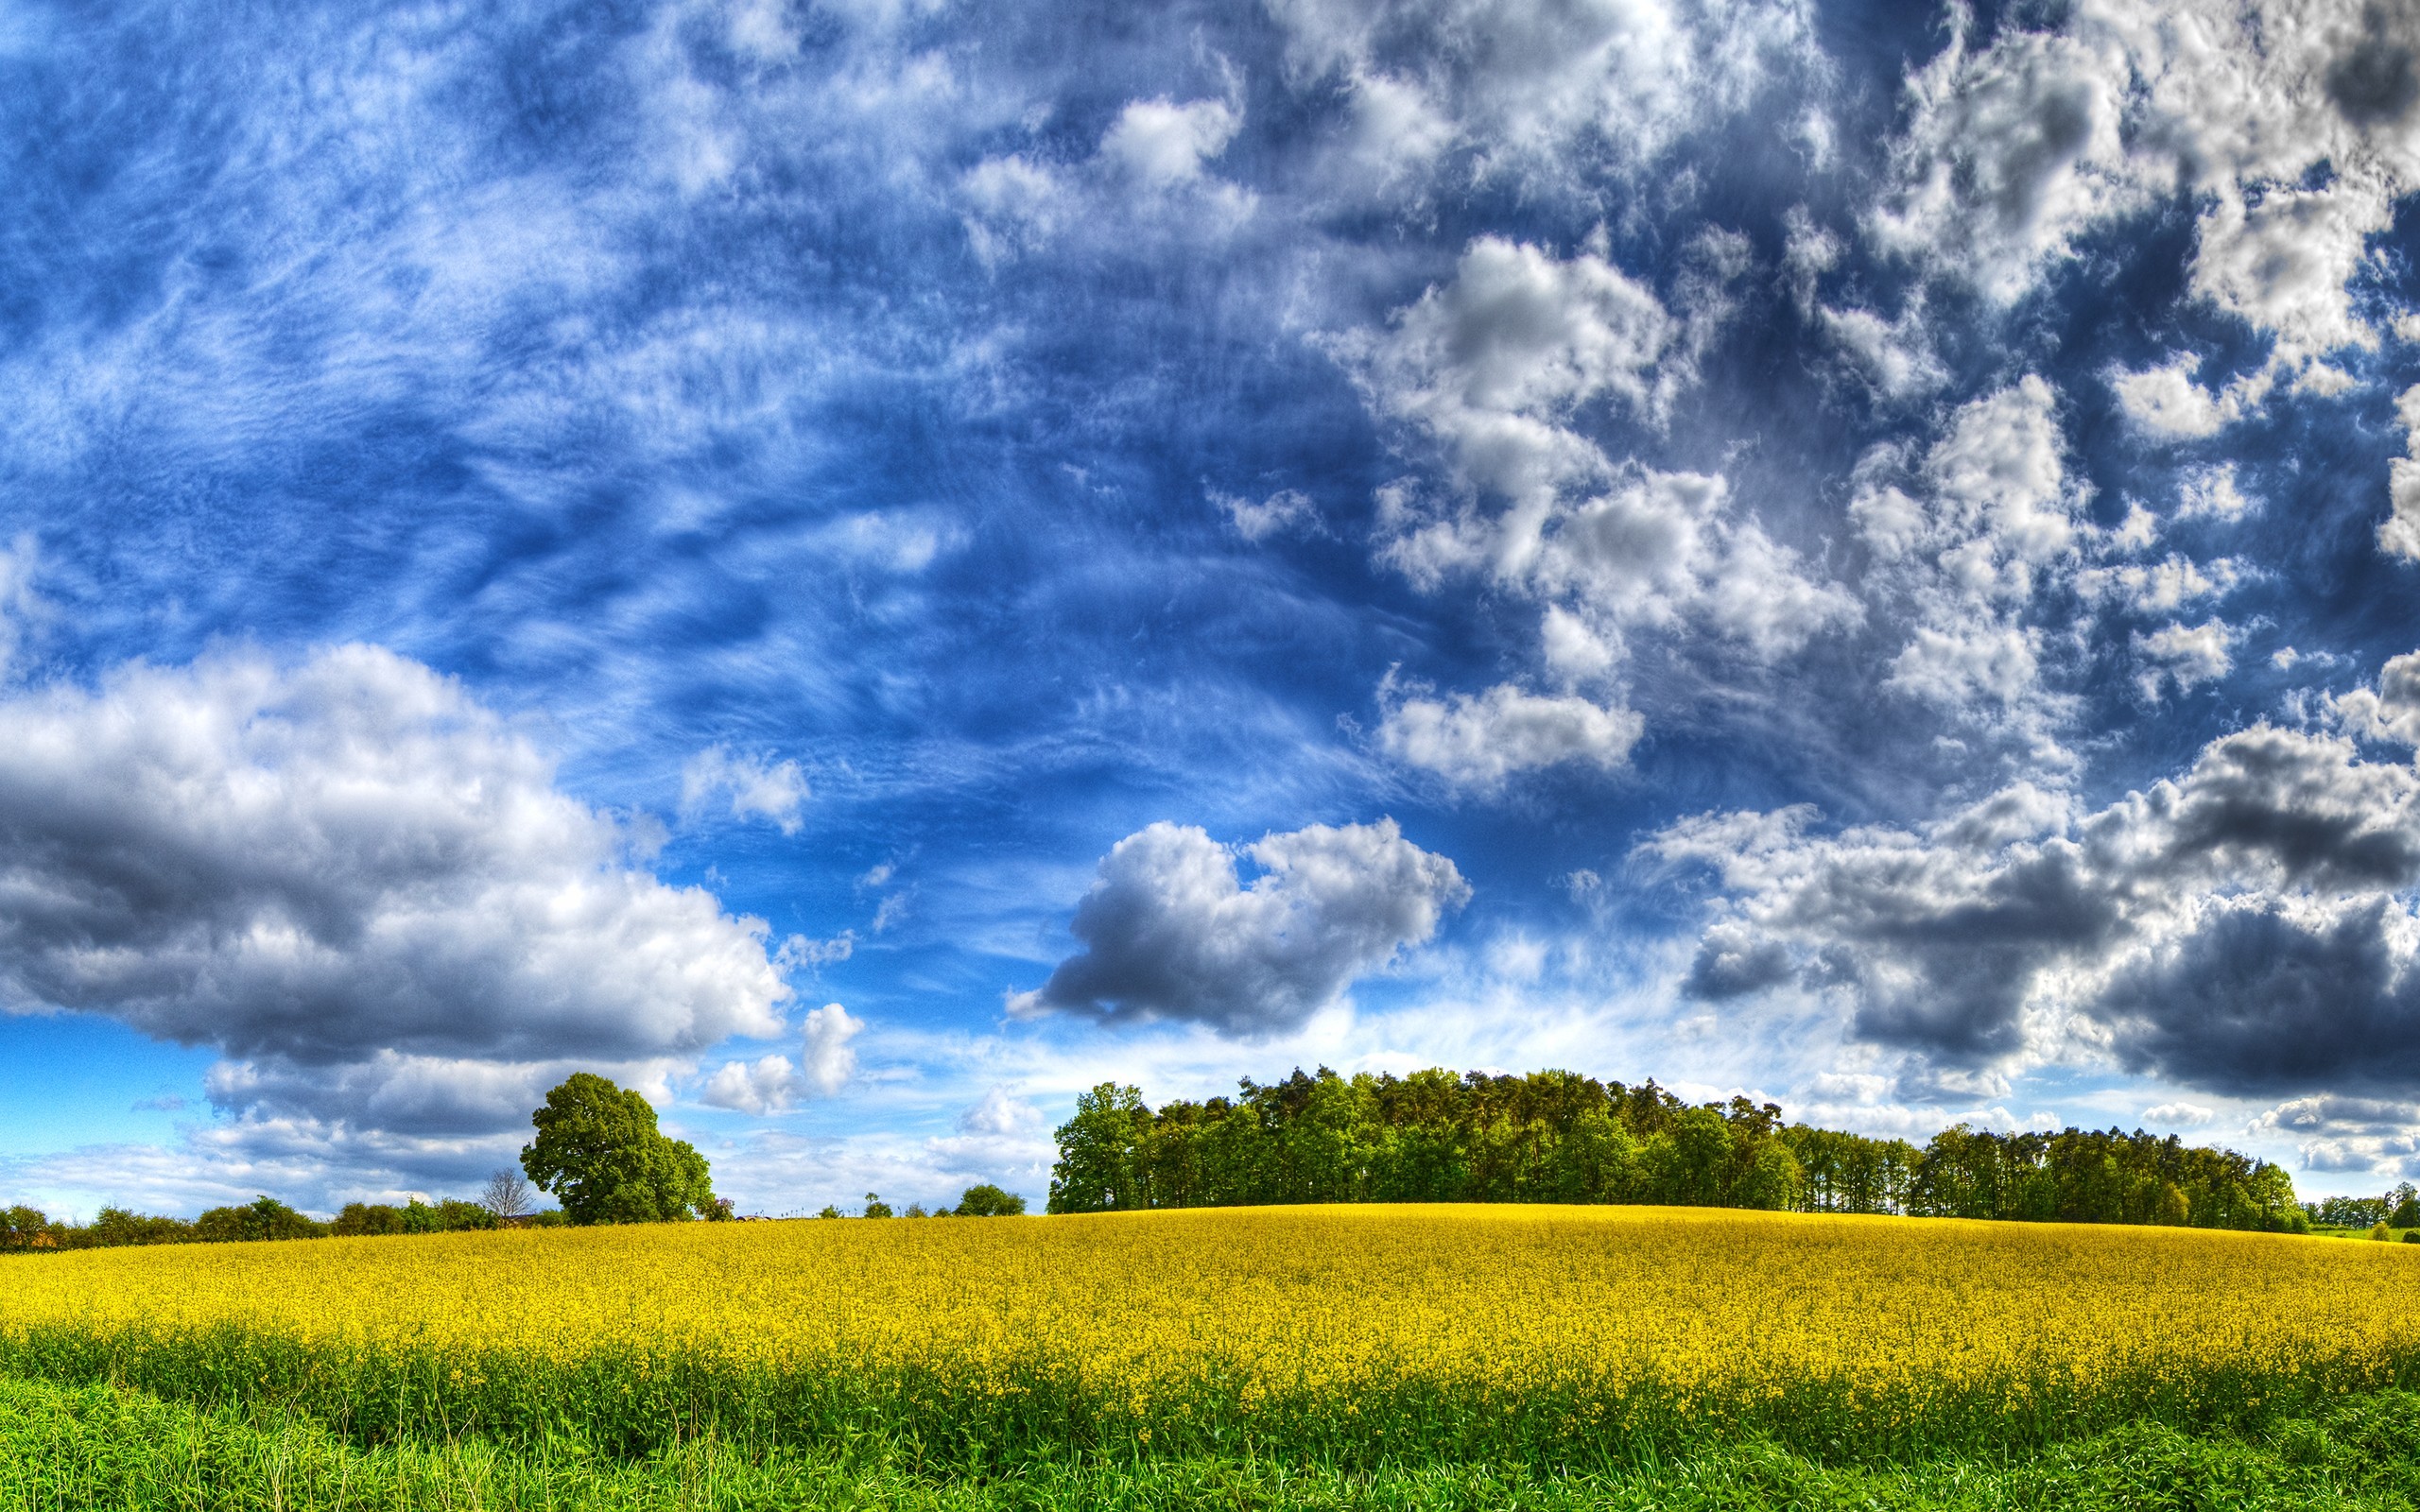 General 2560x1600 nature landscape HDR field trees clouds Agro (Plants)